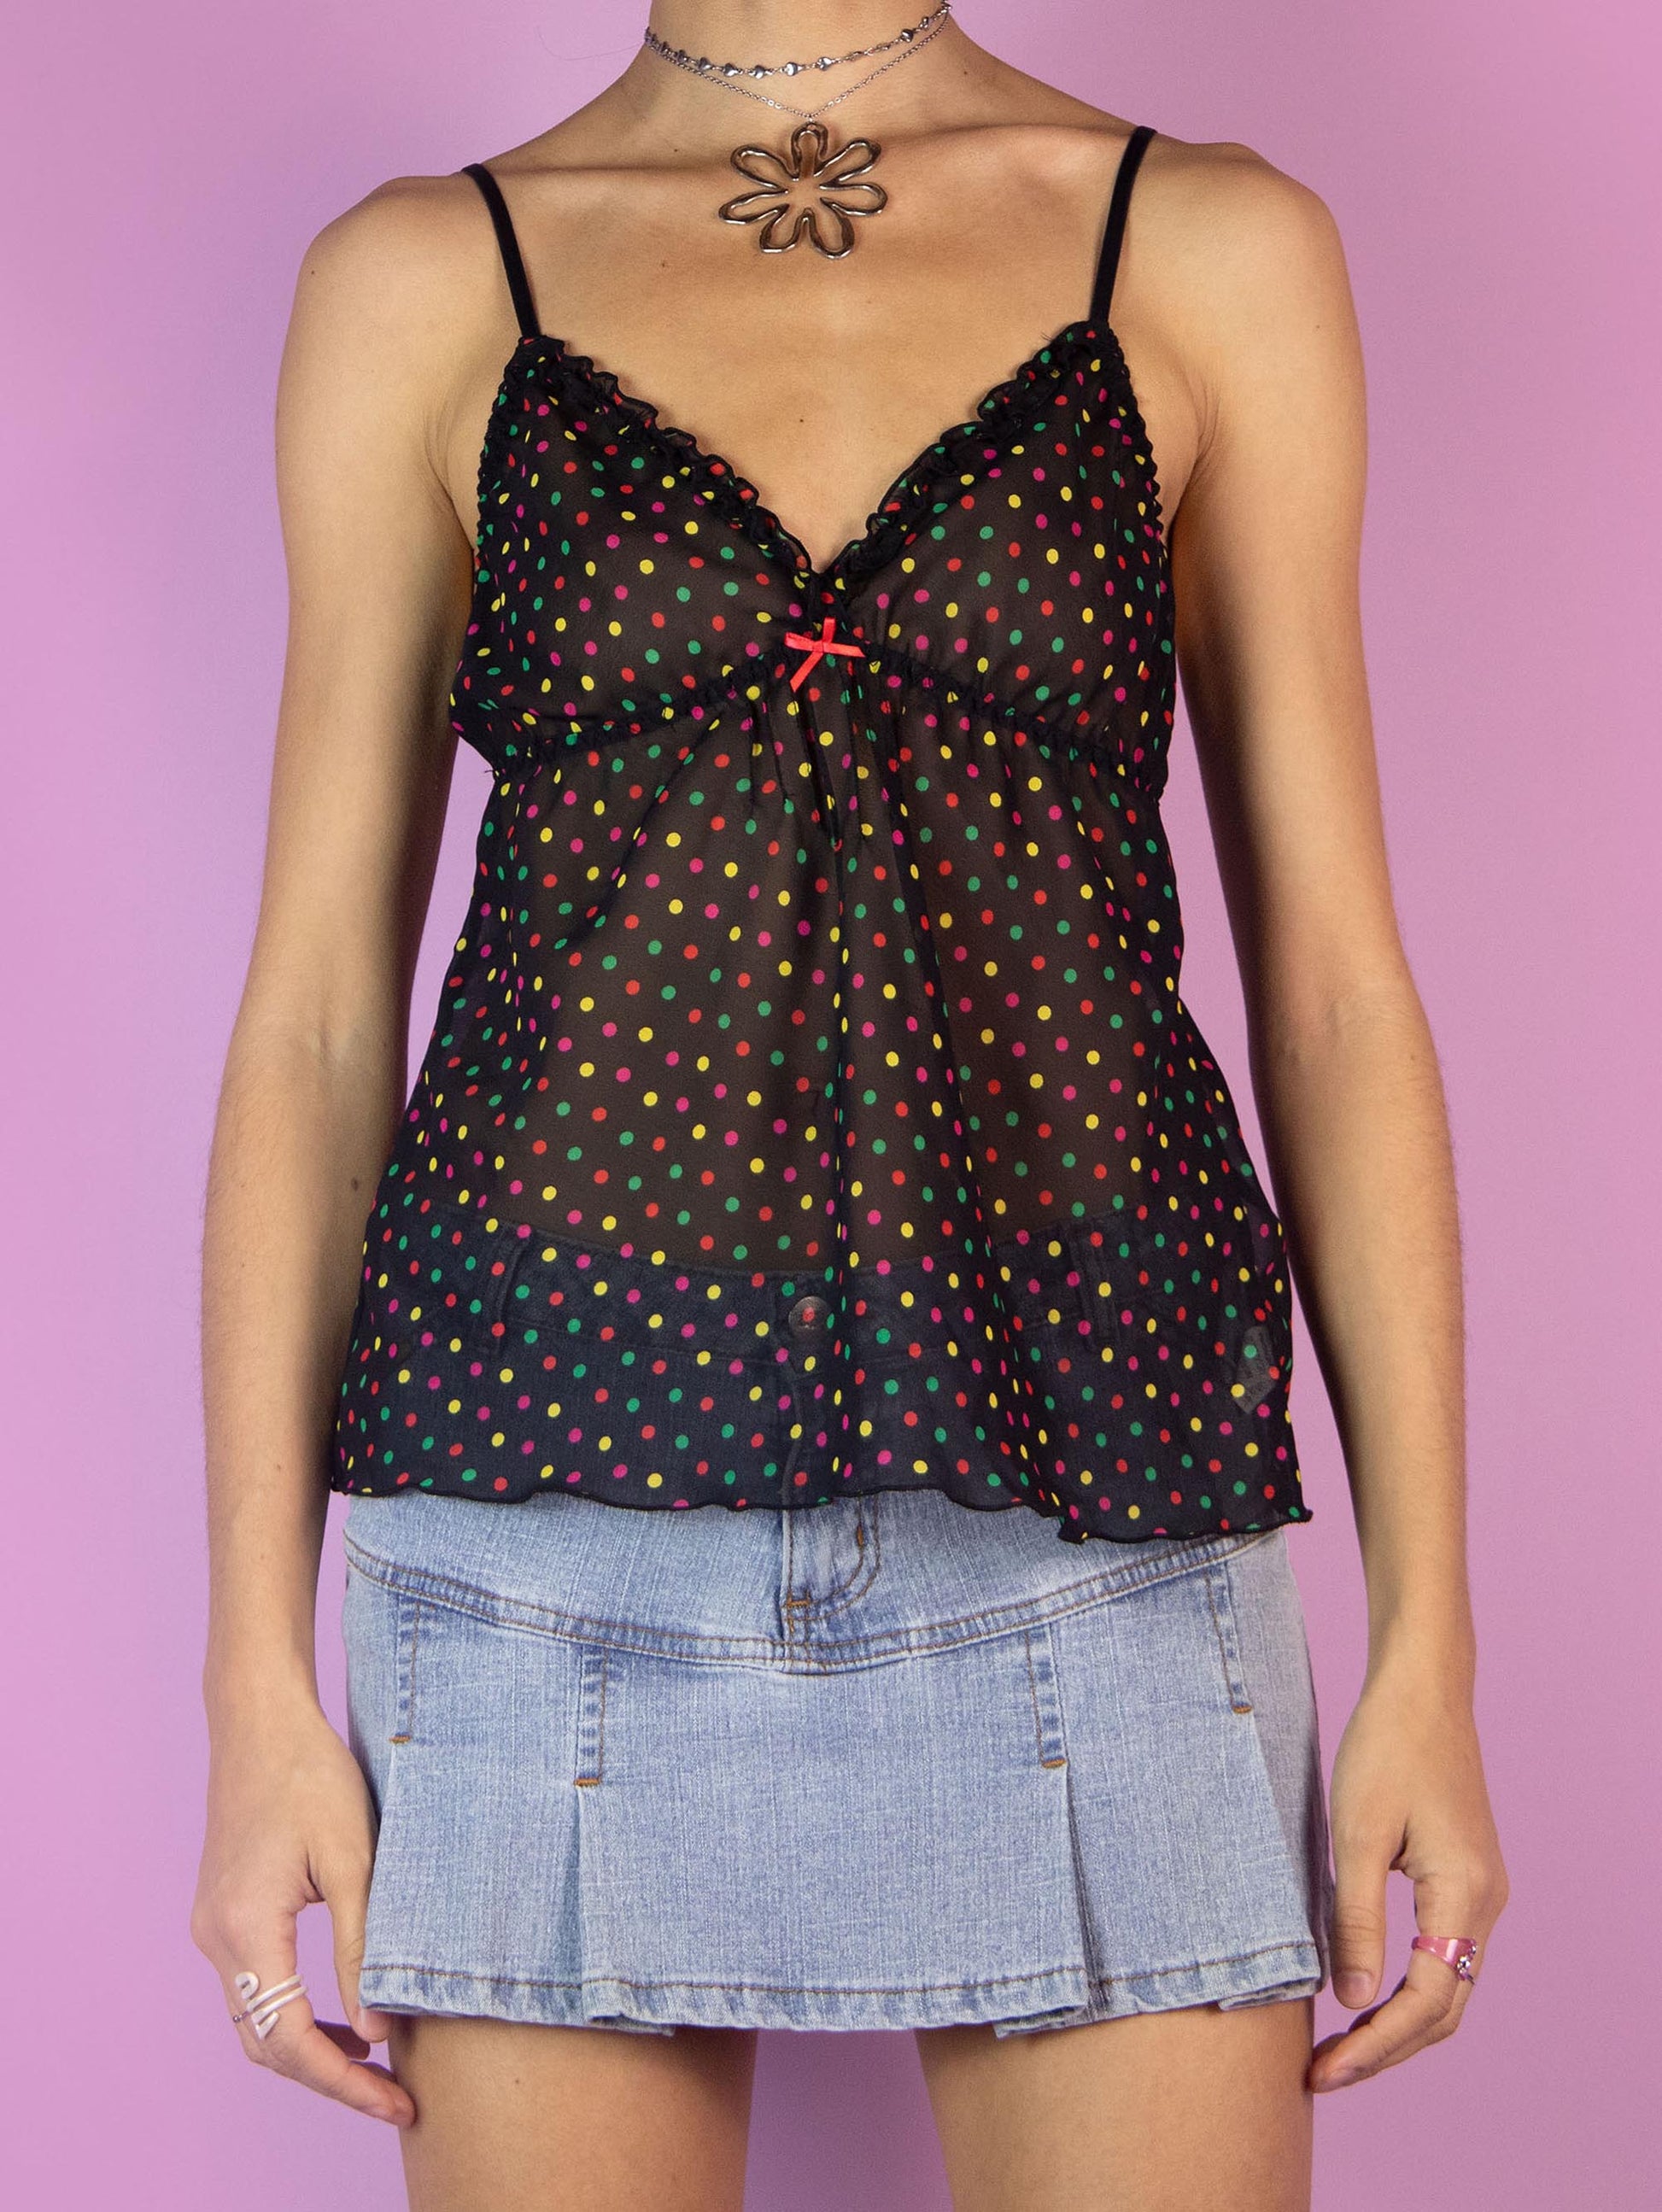 The Y2K Black Sheer Cami Top is a vintage semi-transparent camisole with a multicolored polka dot pattern, V-neckline, and adjustable straps. Romantic coquette 2000s tank top.